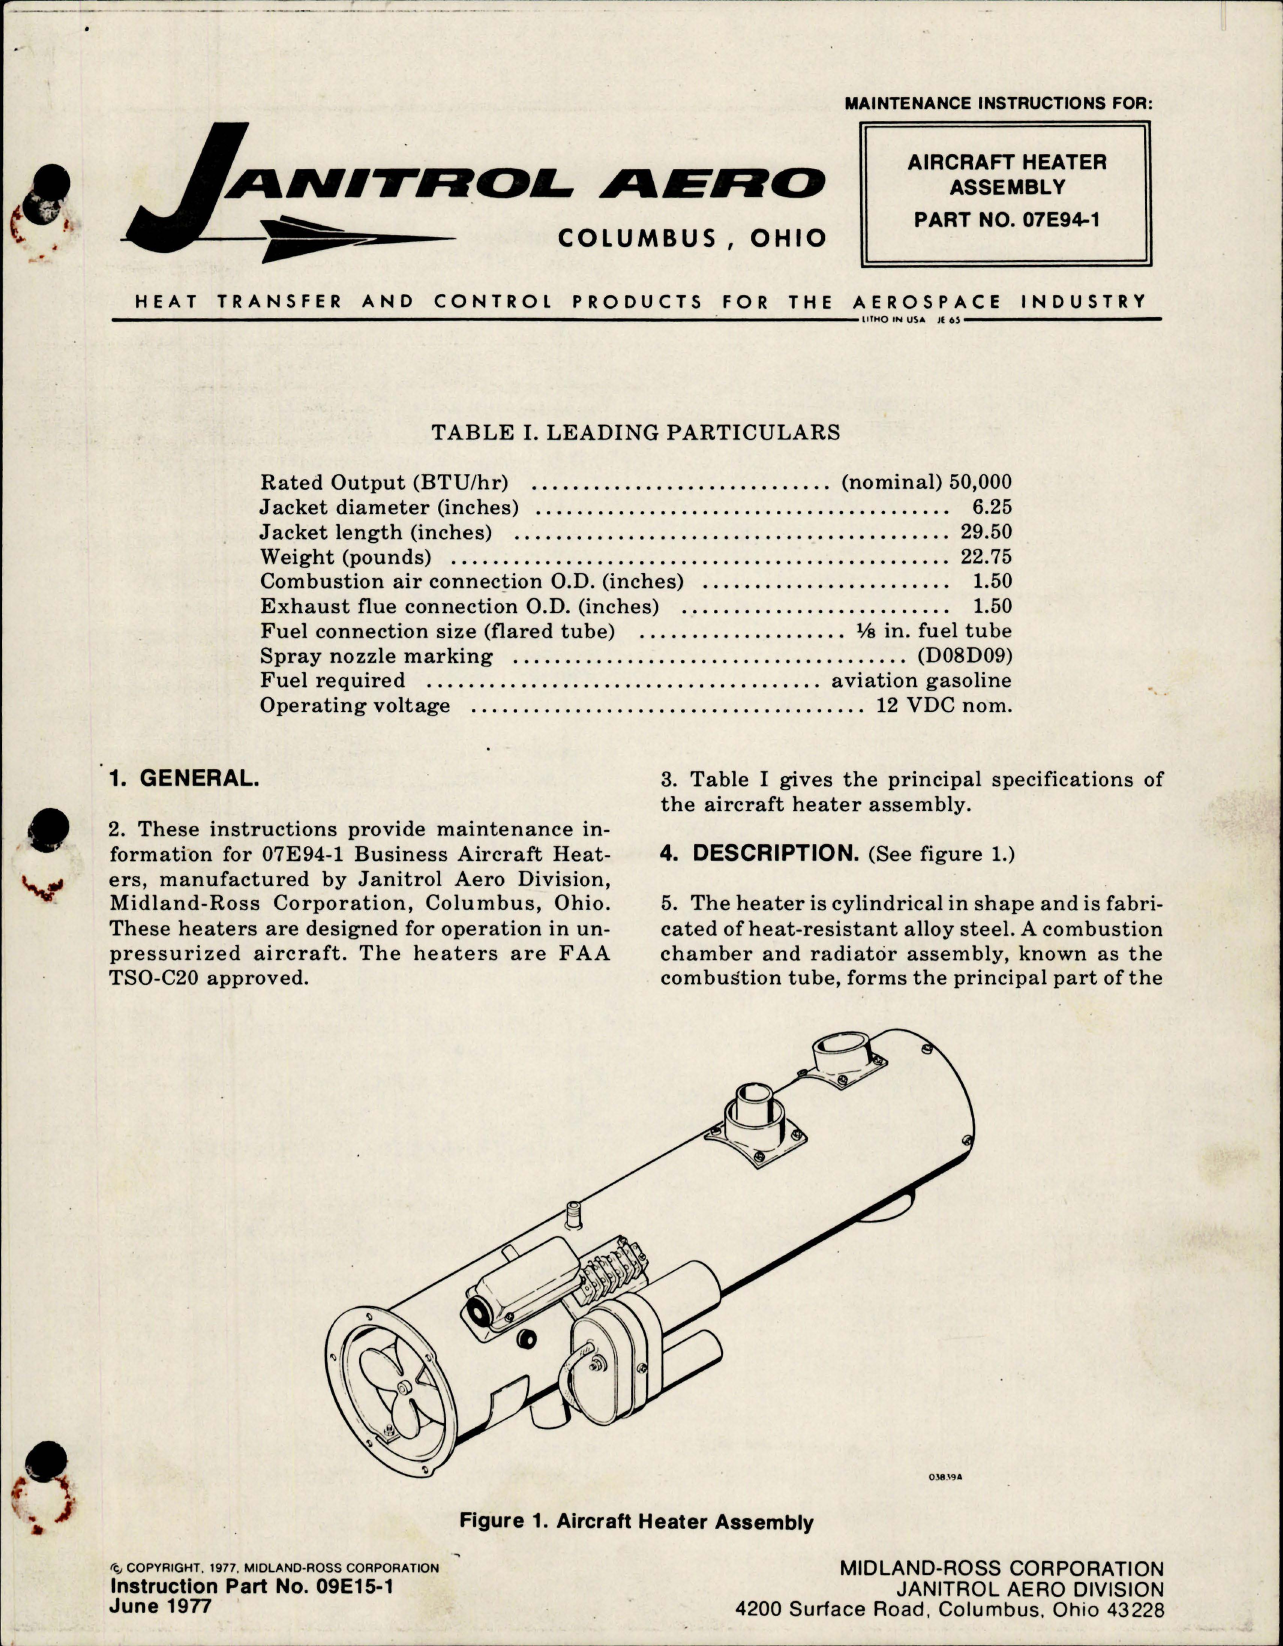 Sample page 1 from AirCorps Library document: Maintenance Instructions for Aircraft Heater Assembly - Part 07E94-1 